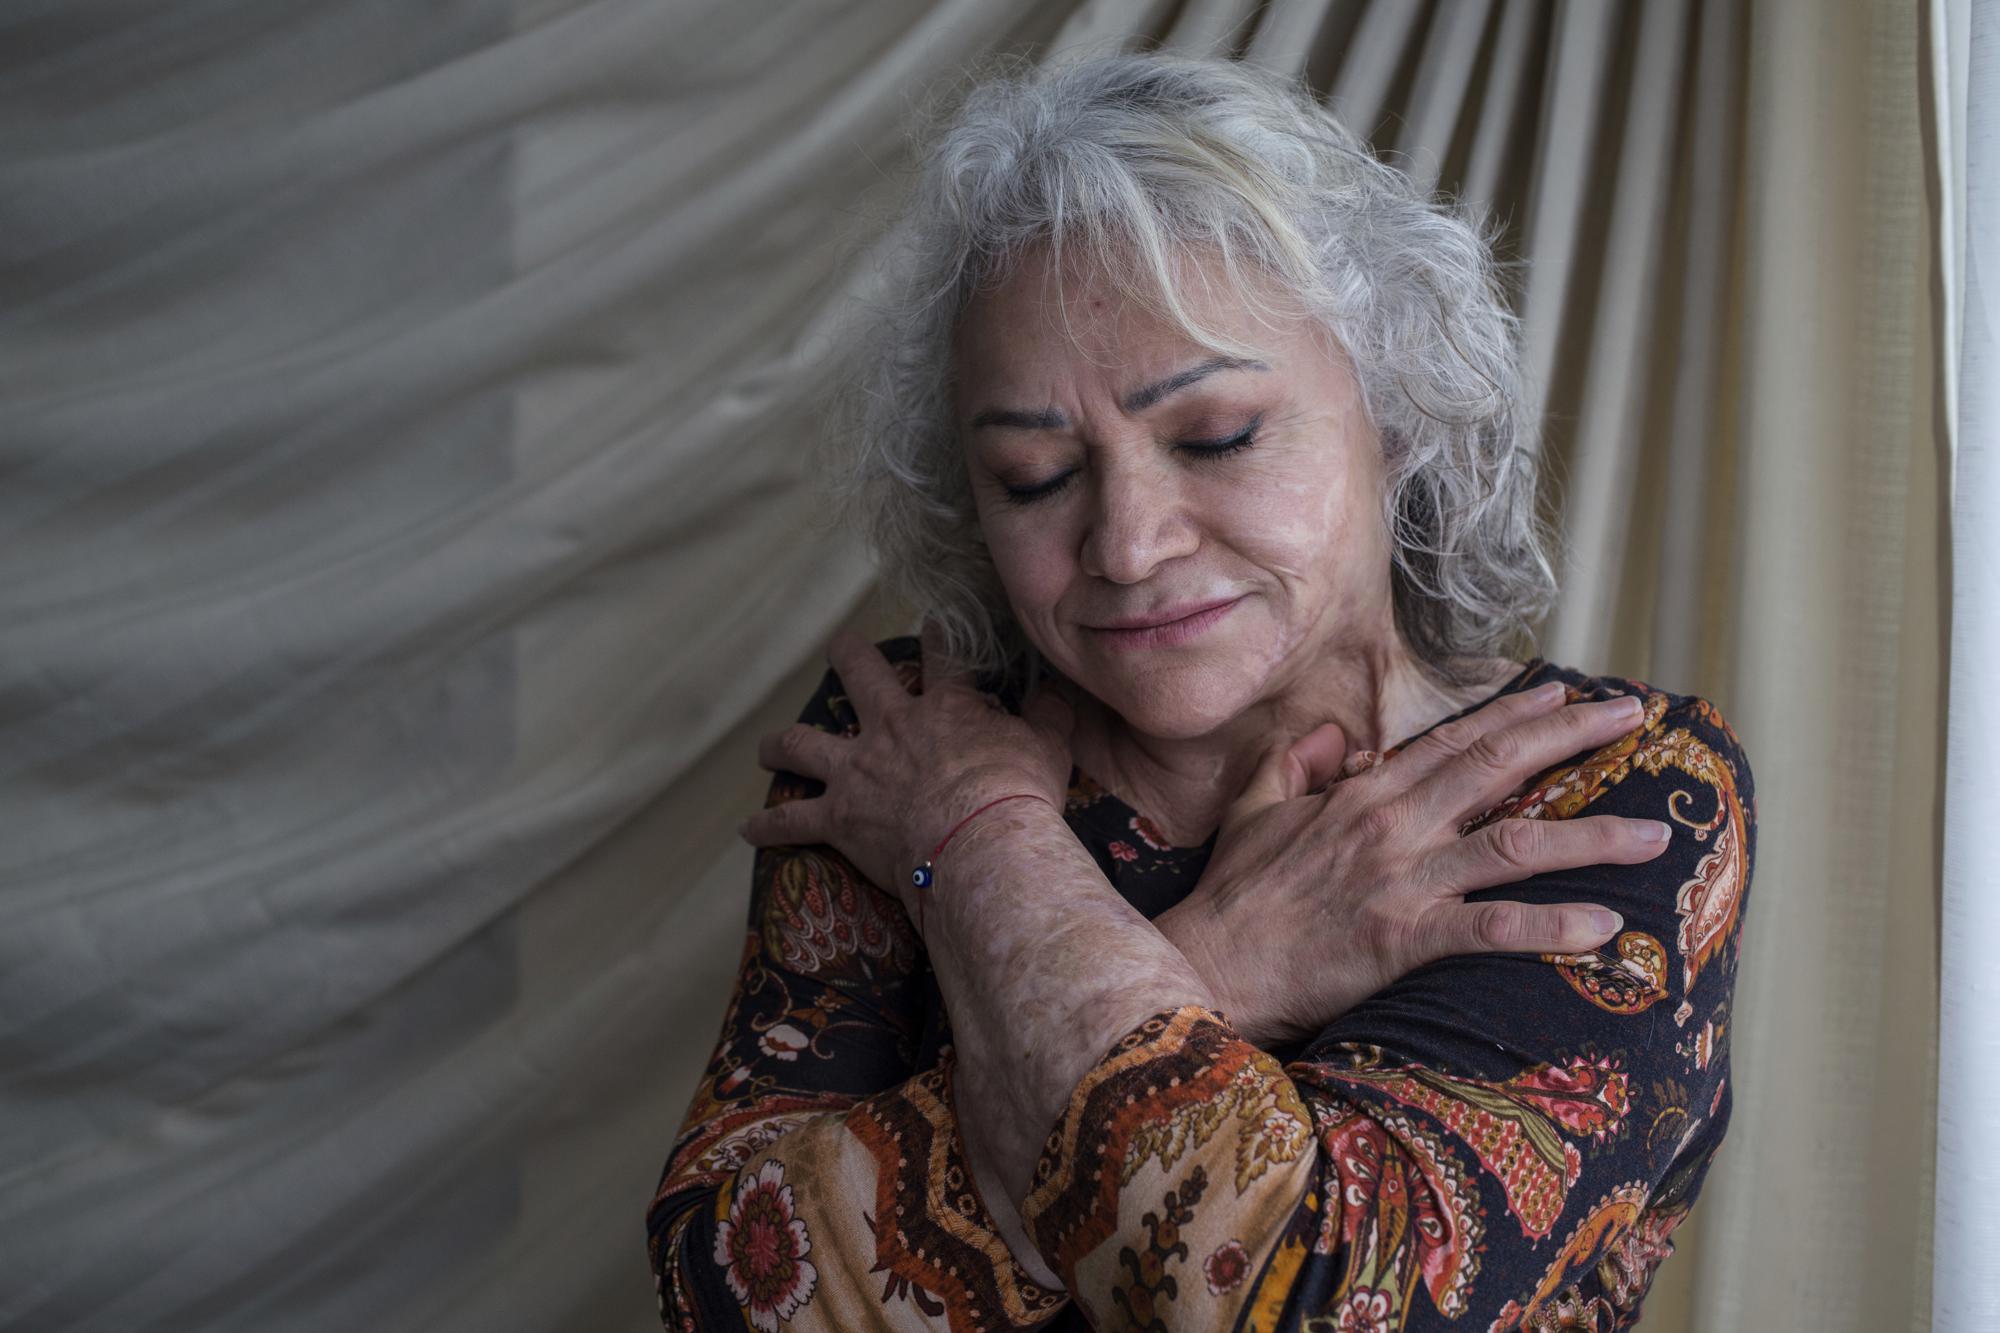 Martha Avila, who survived an acid attack by her former son-in-law four years ago when she was 59, embraces herself as she poses for a portrait at her home in the state of Mexico, Mexico, June 13, 2021. Avila’s attack happened on International Women’s Day in 2017 while she was at work, two years after her daughter had left her partner and was in hiding from him, burning her hands, face, neck and chest. The attack came after two incidents when he had thrown acid on the family car outside their home. After 15 surgeries, she expects to undergo more to help regain mobility. (AP Photo/Ginnette Riquelme)